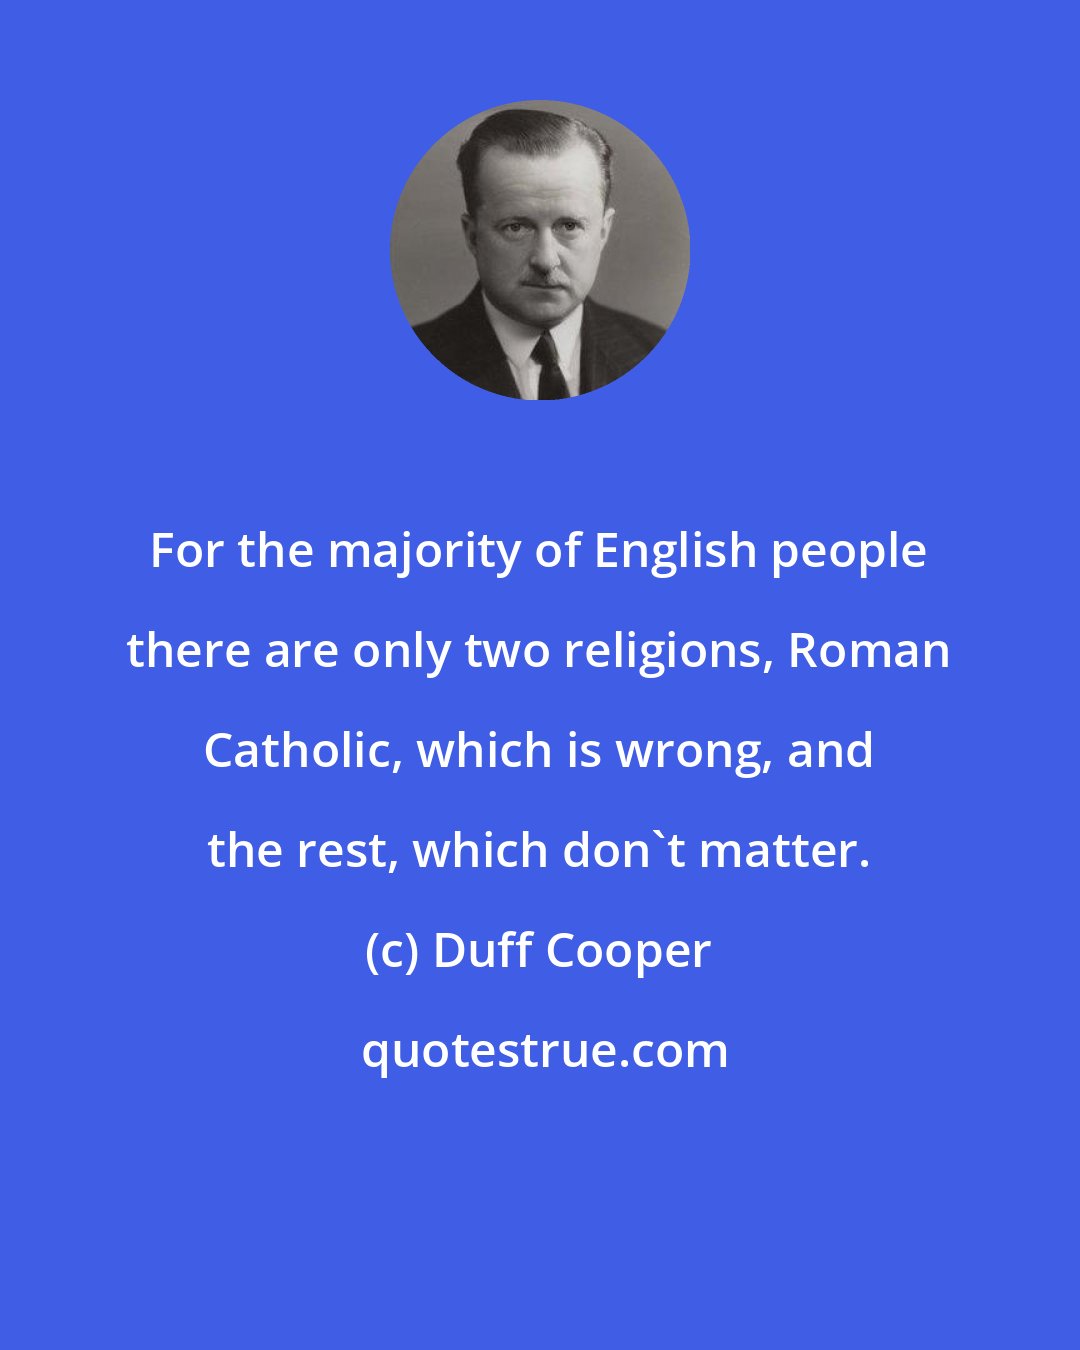 Duff Cooper: For the majority of English people there are only two religions, Roman Catholic, which is wrong, and the rest, which don't matter.